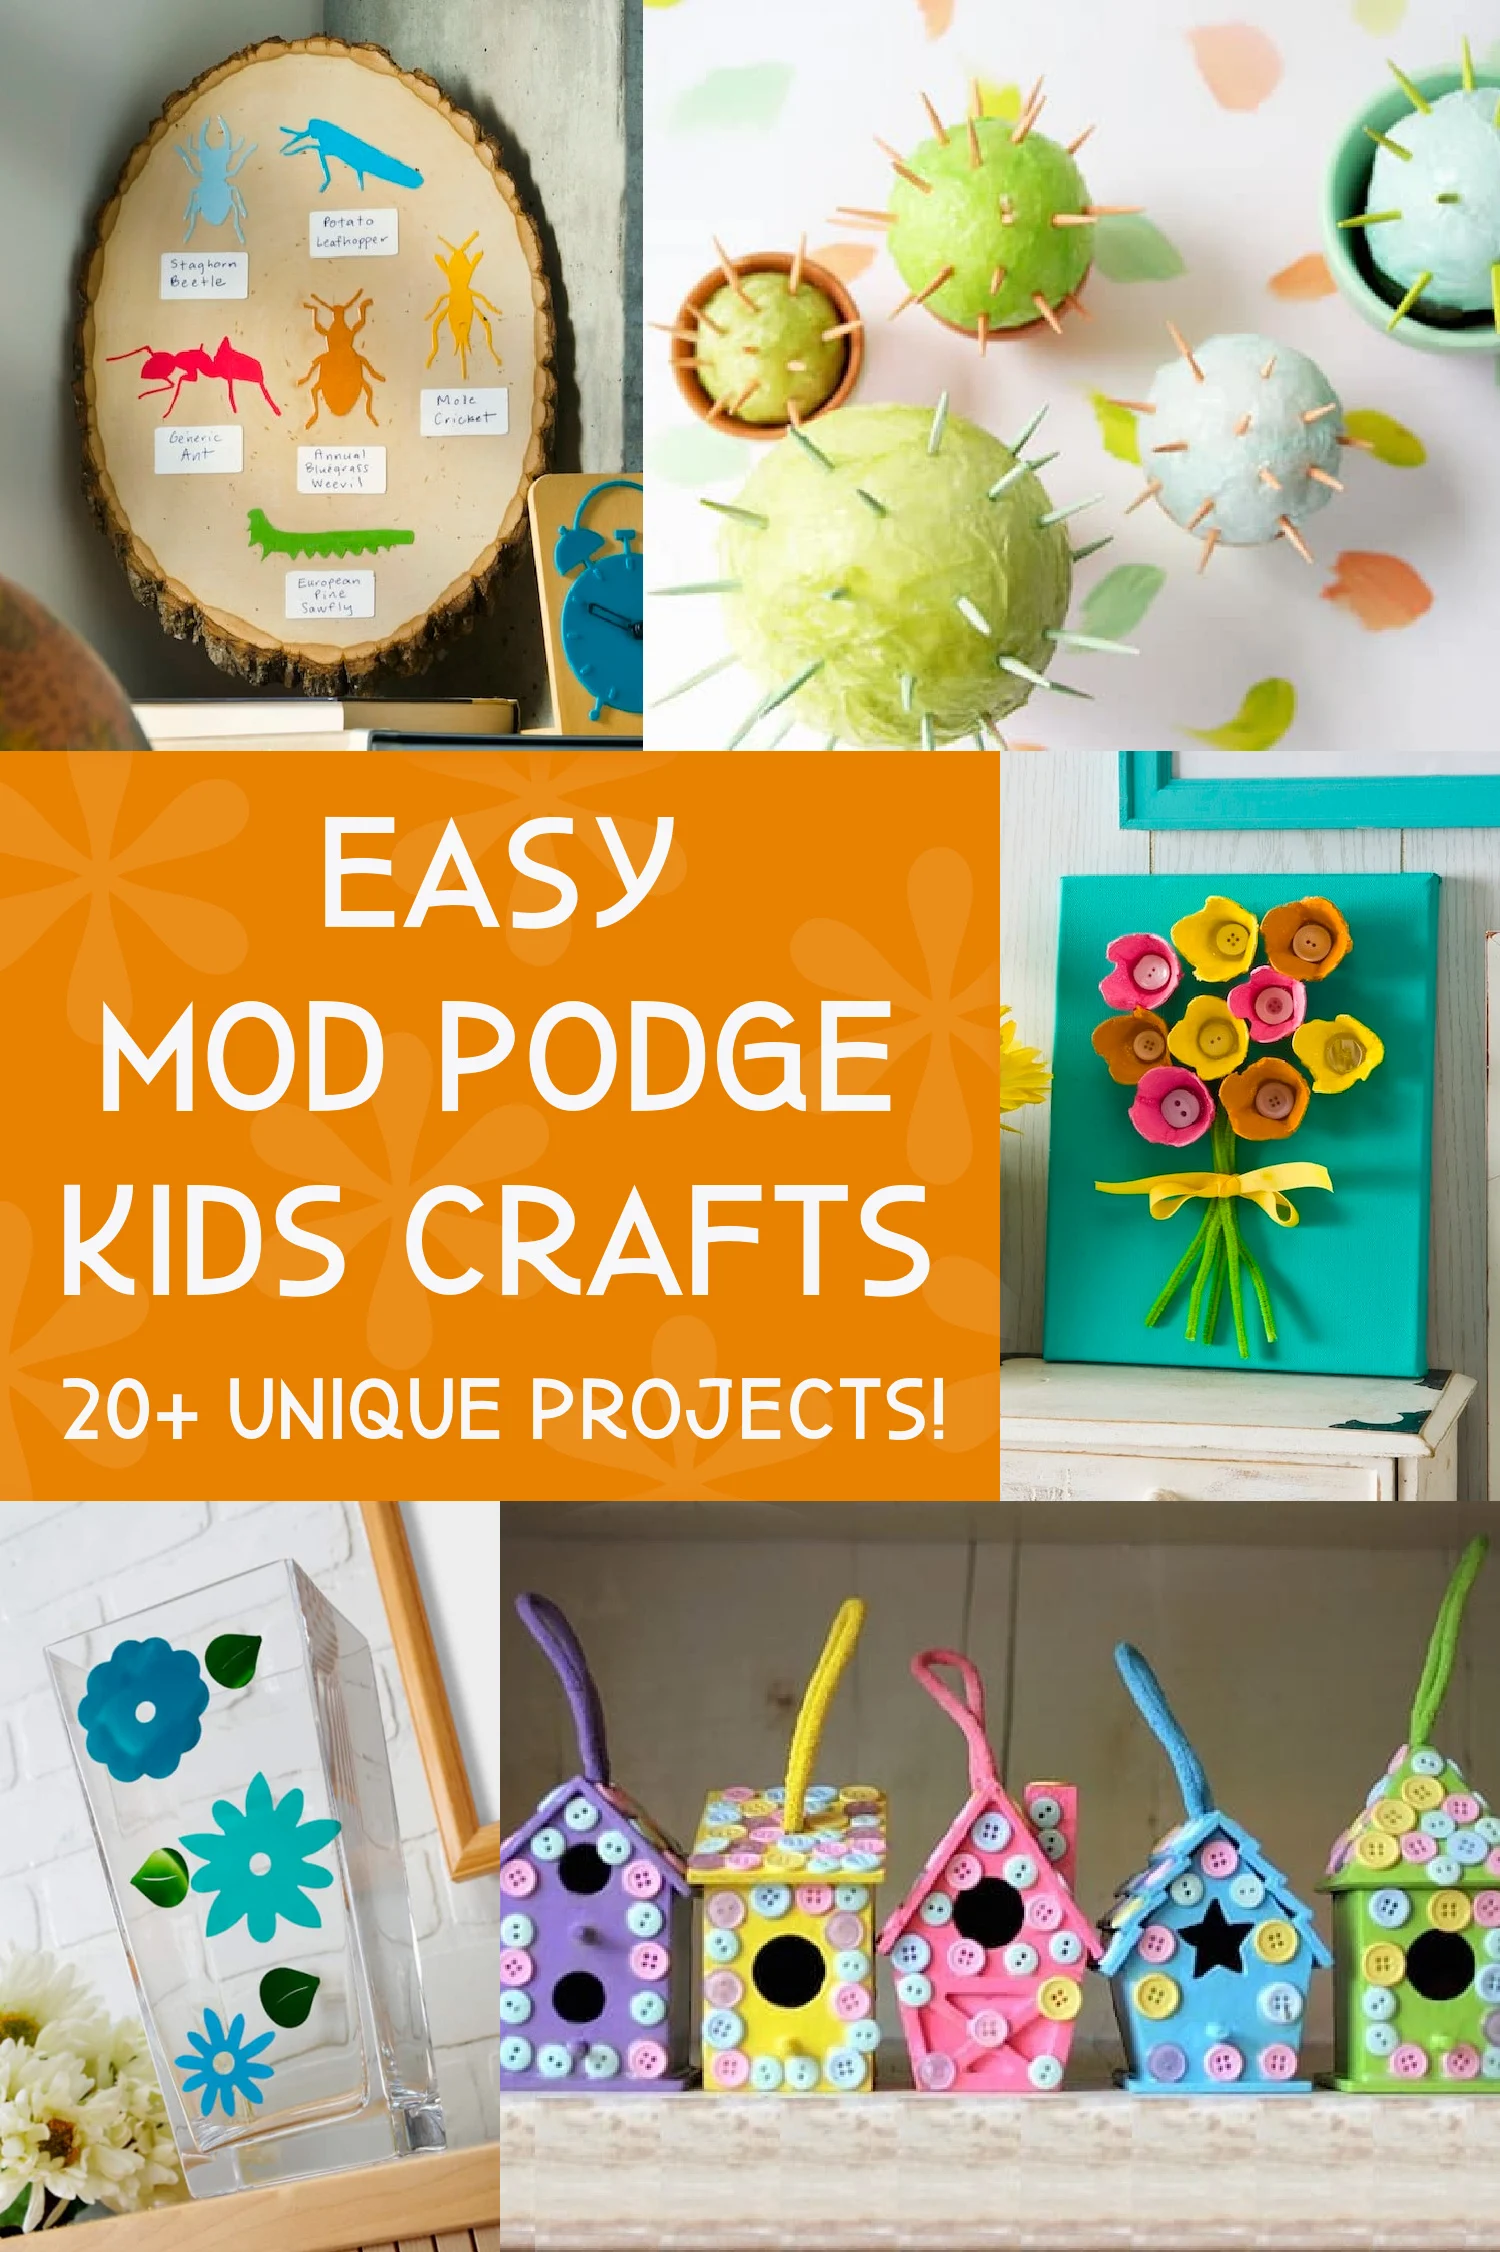 Painting for Kids: 50 Unique Ideas They'll Love - Mod Podge Rocks